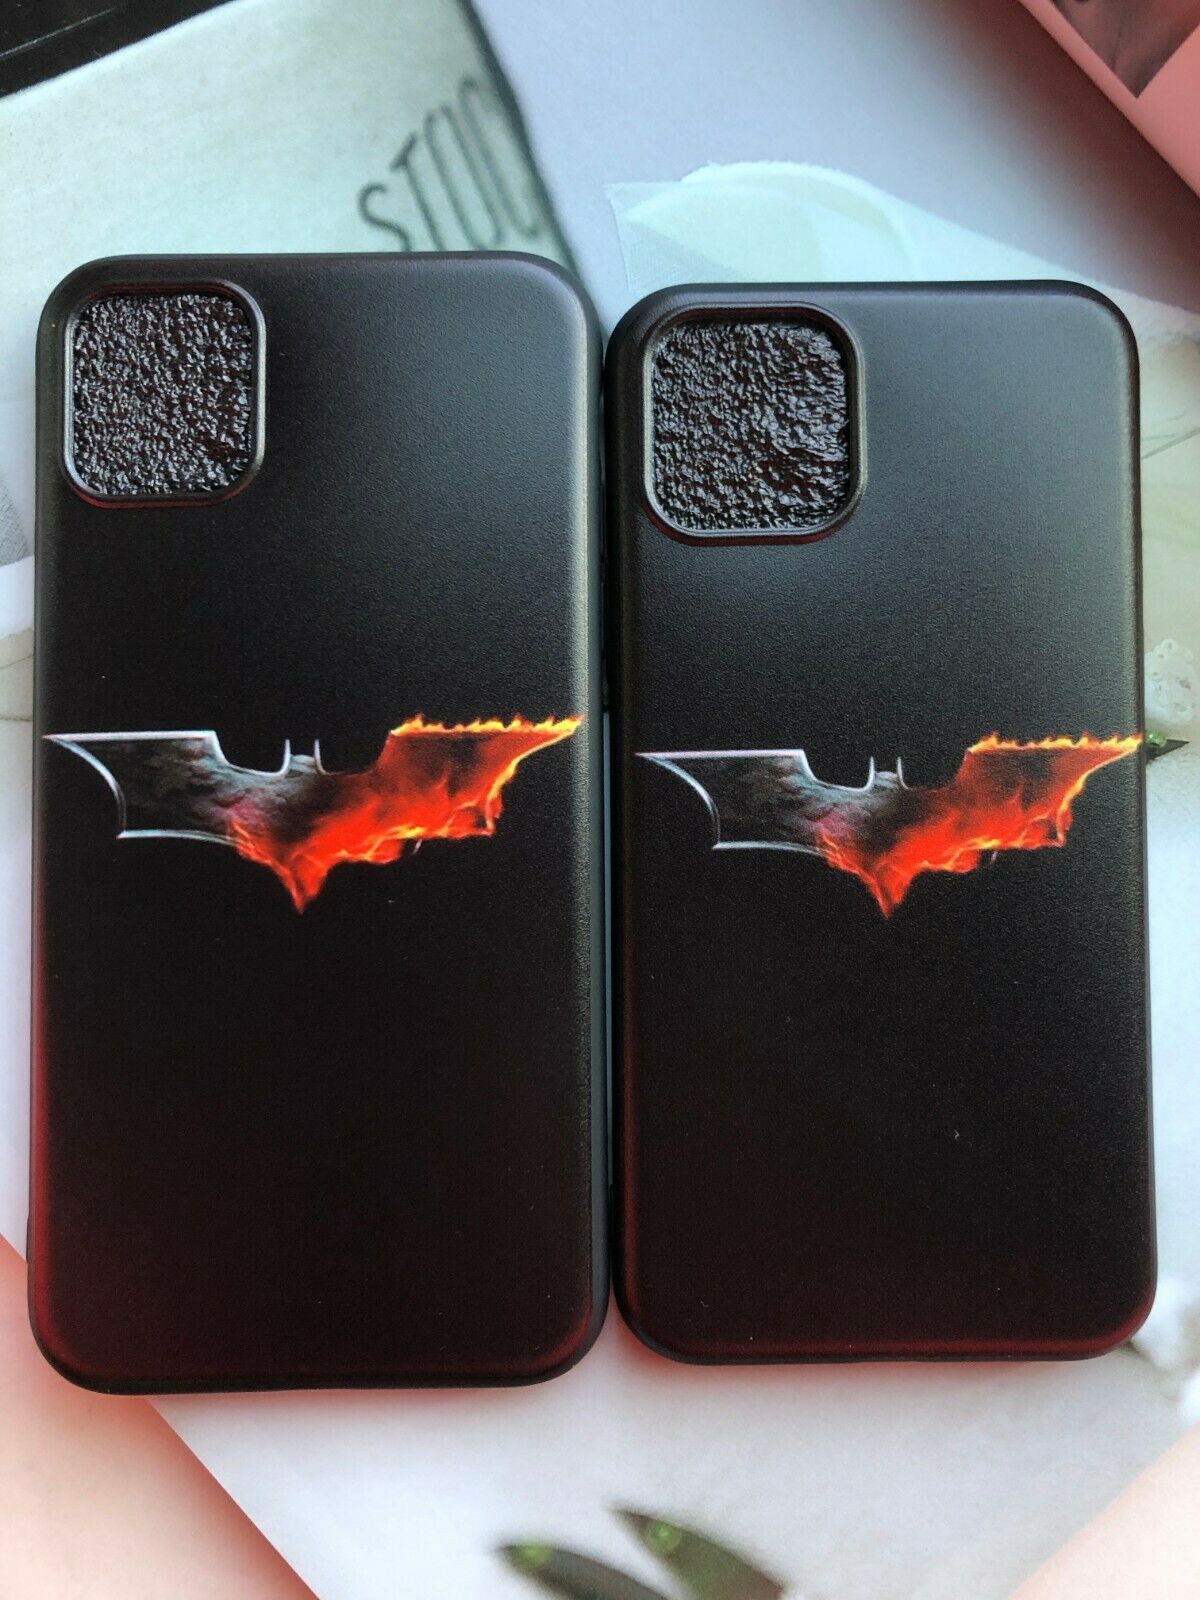 Buy More Save More+Free case+Free Ship Marvel Super Hero iPhone Case 11,11 Pro realdrummer215 iPhone 11 Dark Knight Flame Batman 